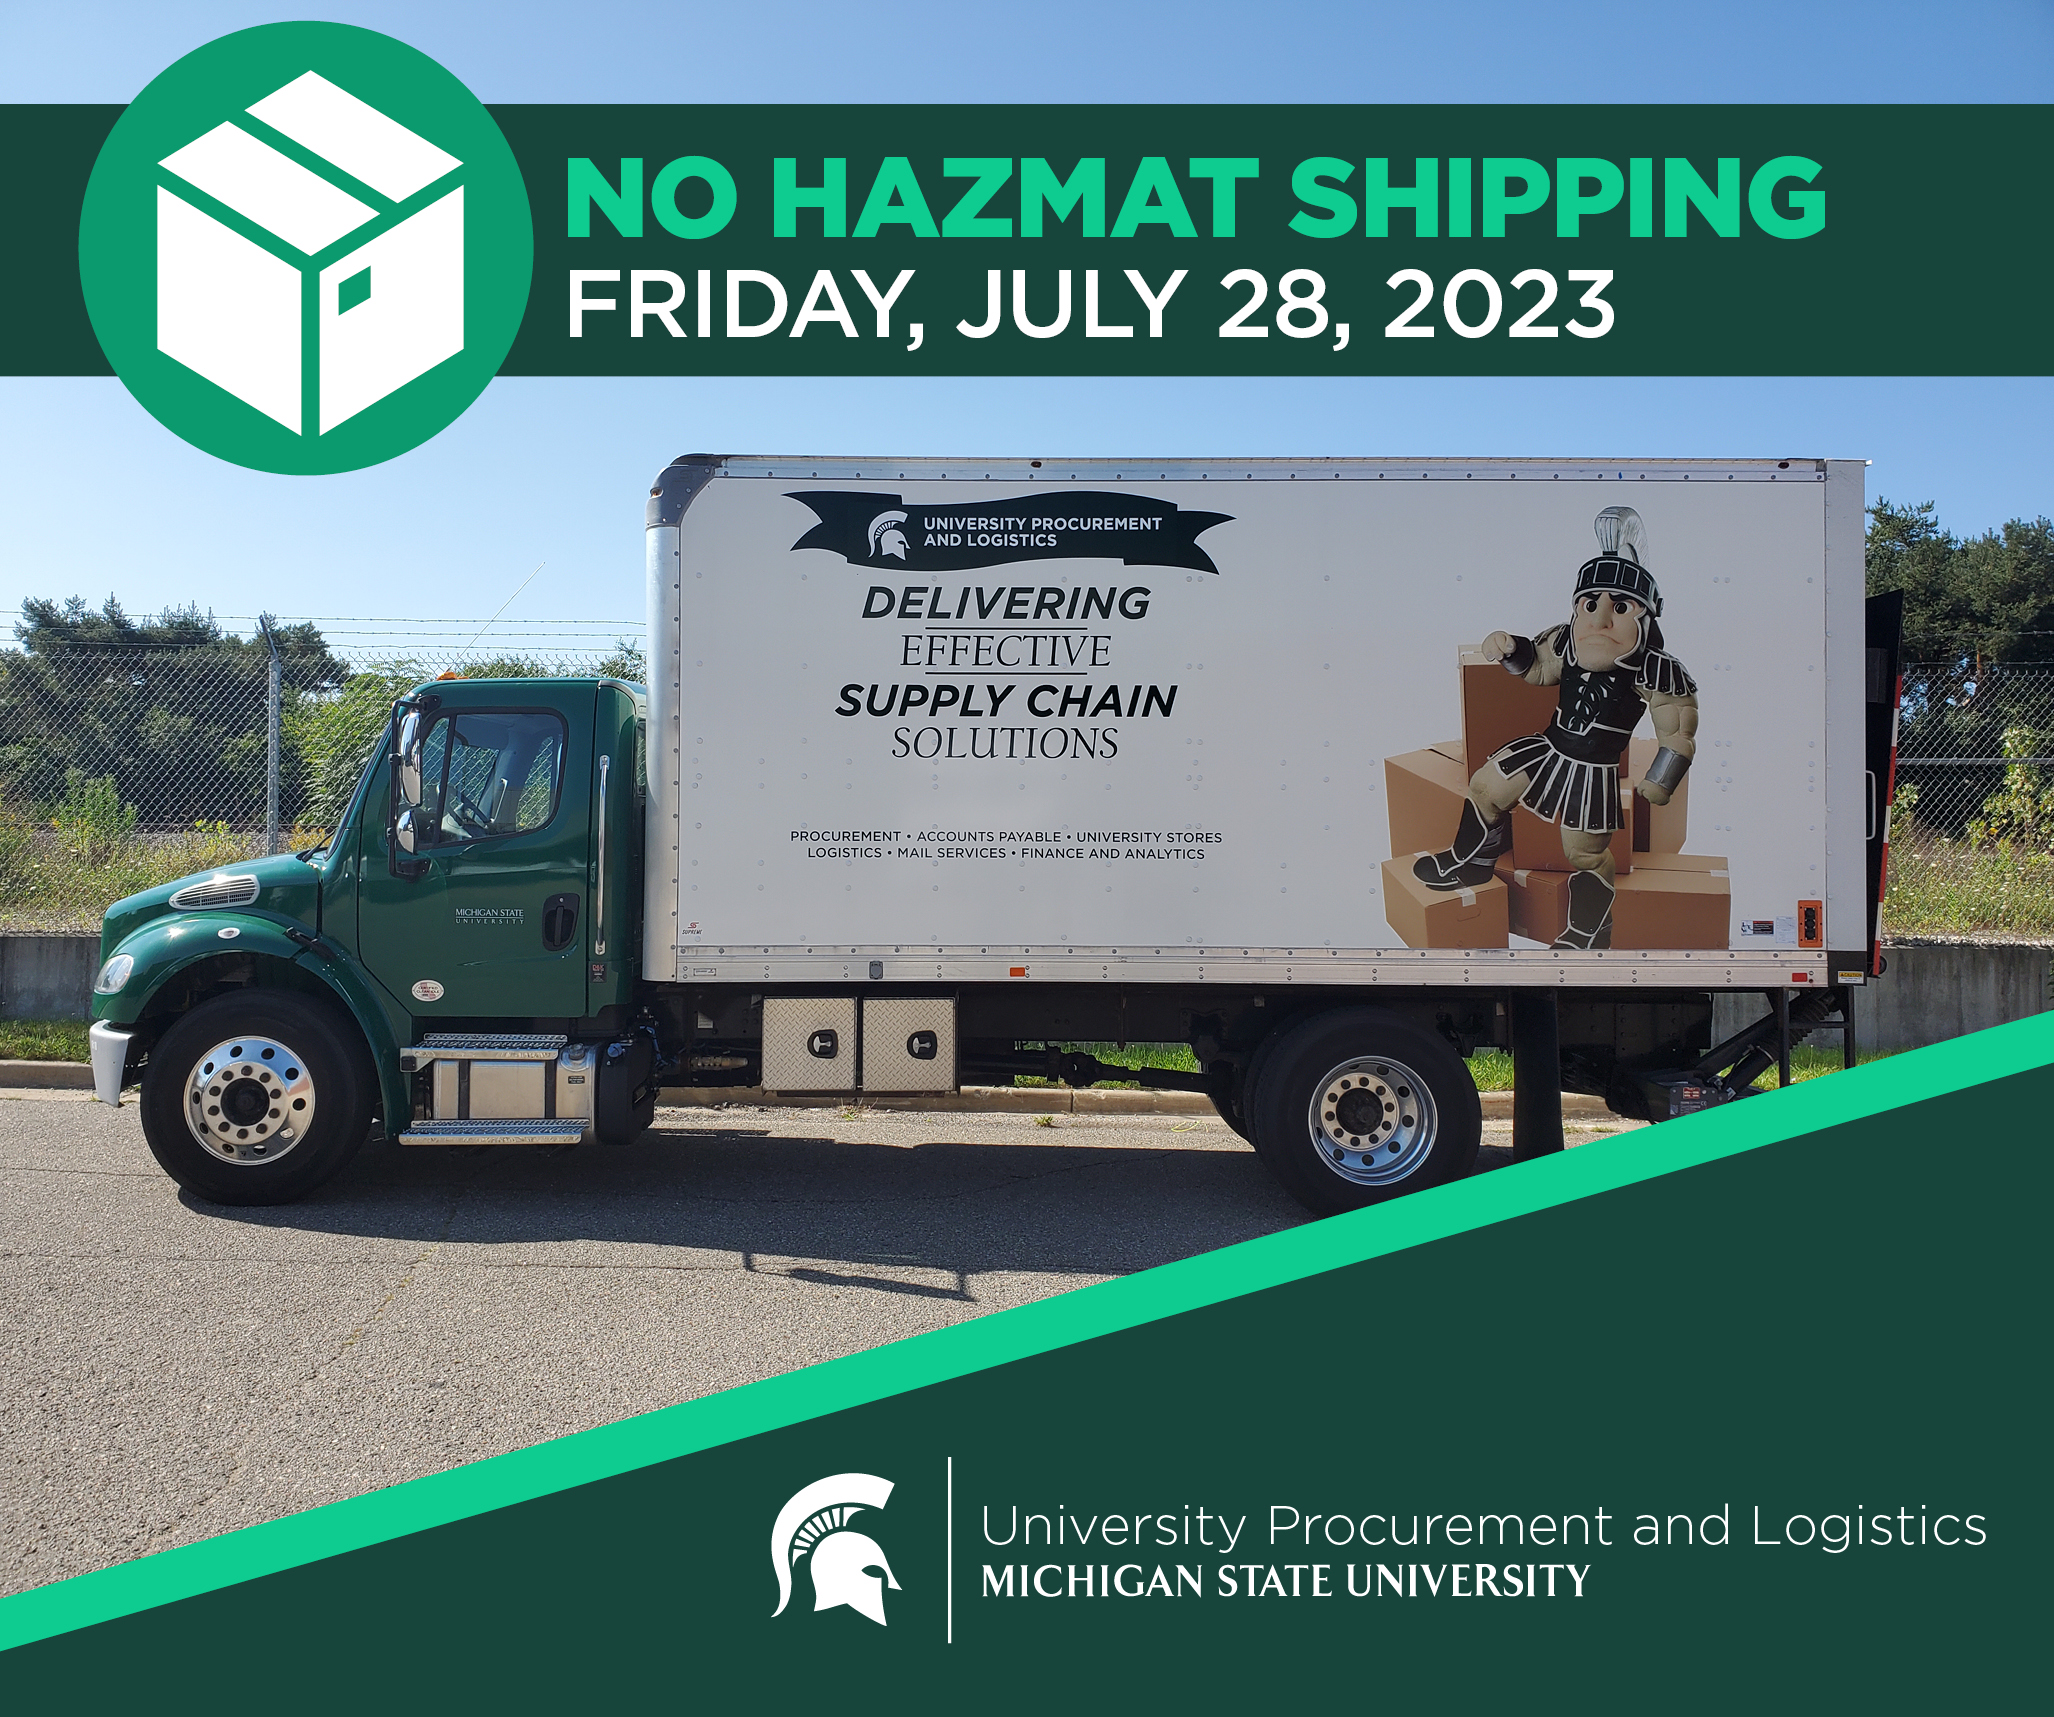 An image of a UPL delivery truck with title text above in a green banner that says "No hazmat shipping, Friday, July 28, 2023." The UPL signature logo is displayed in the bottom right corner of the image. 